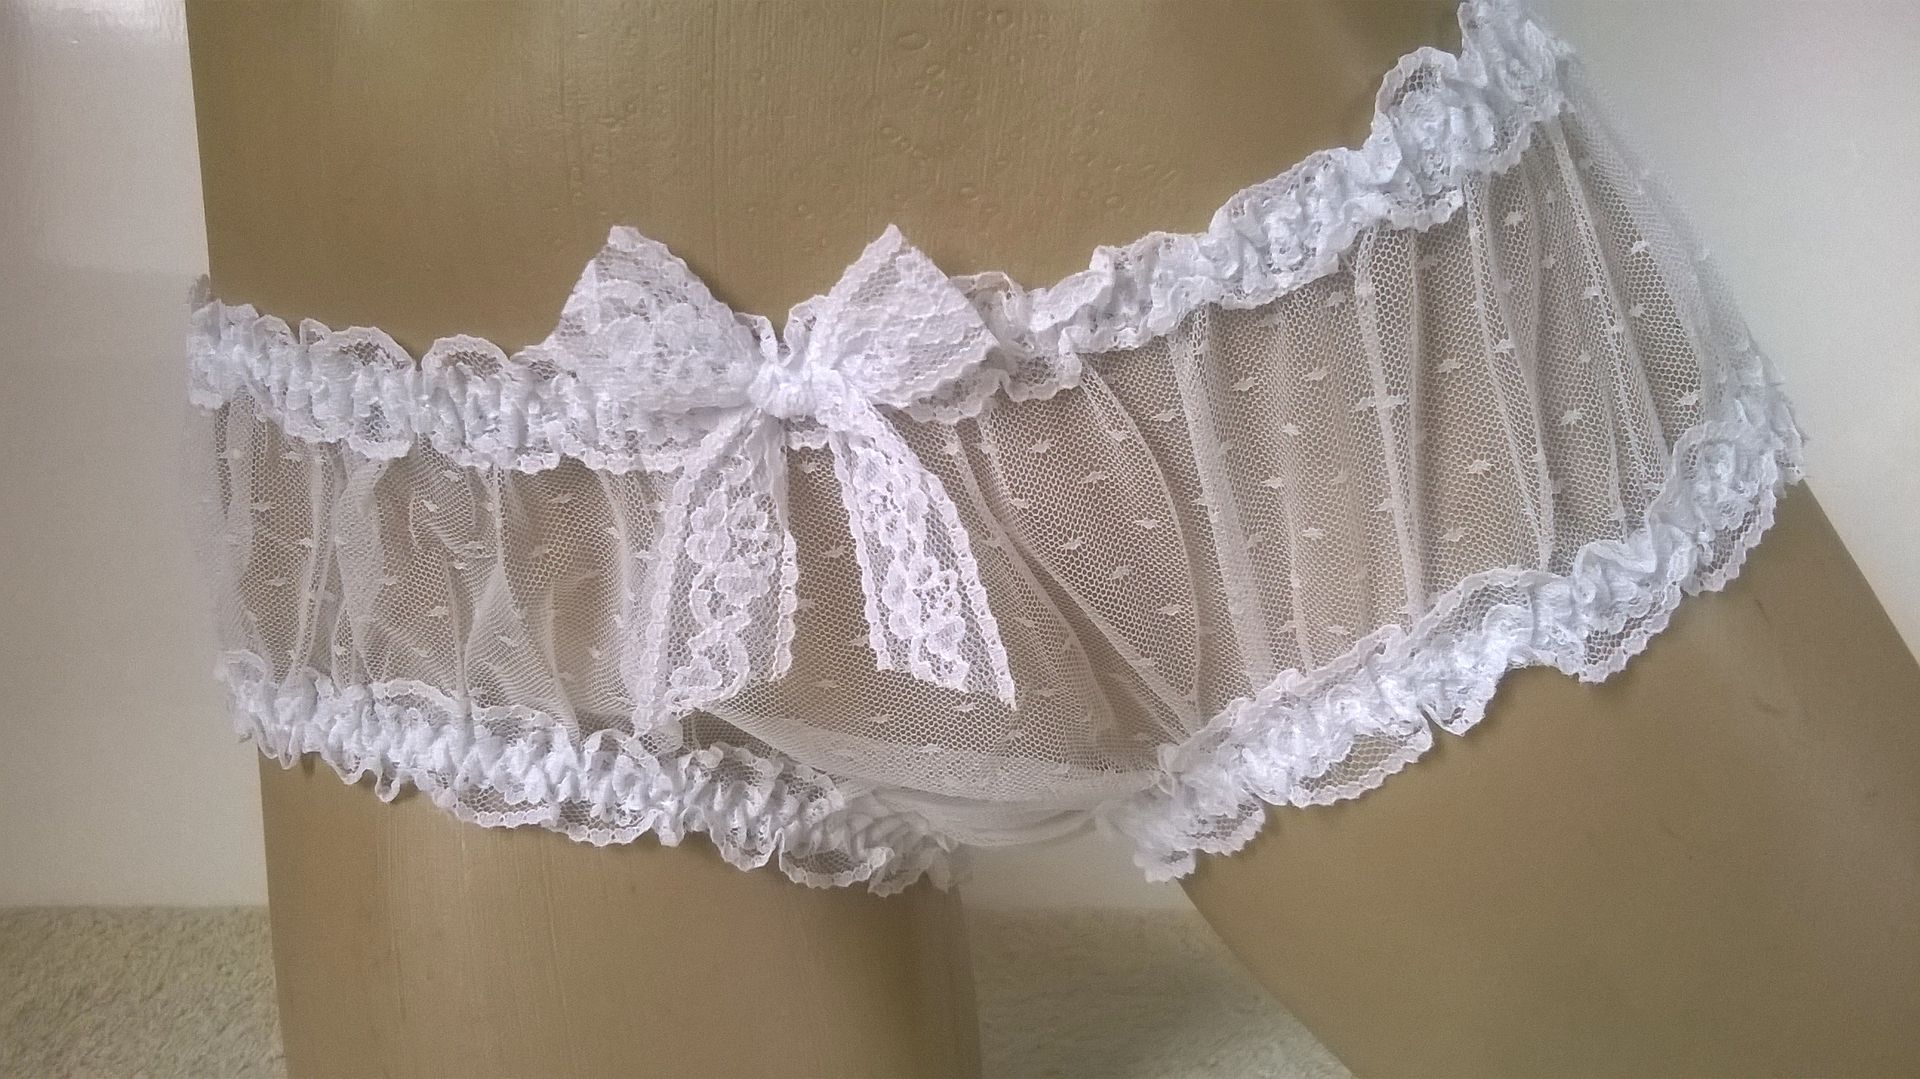 Classic Sissy White Sheer Lace Panties Frilly Frou Frou Knickers Xs 8 Ebay